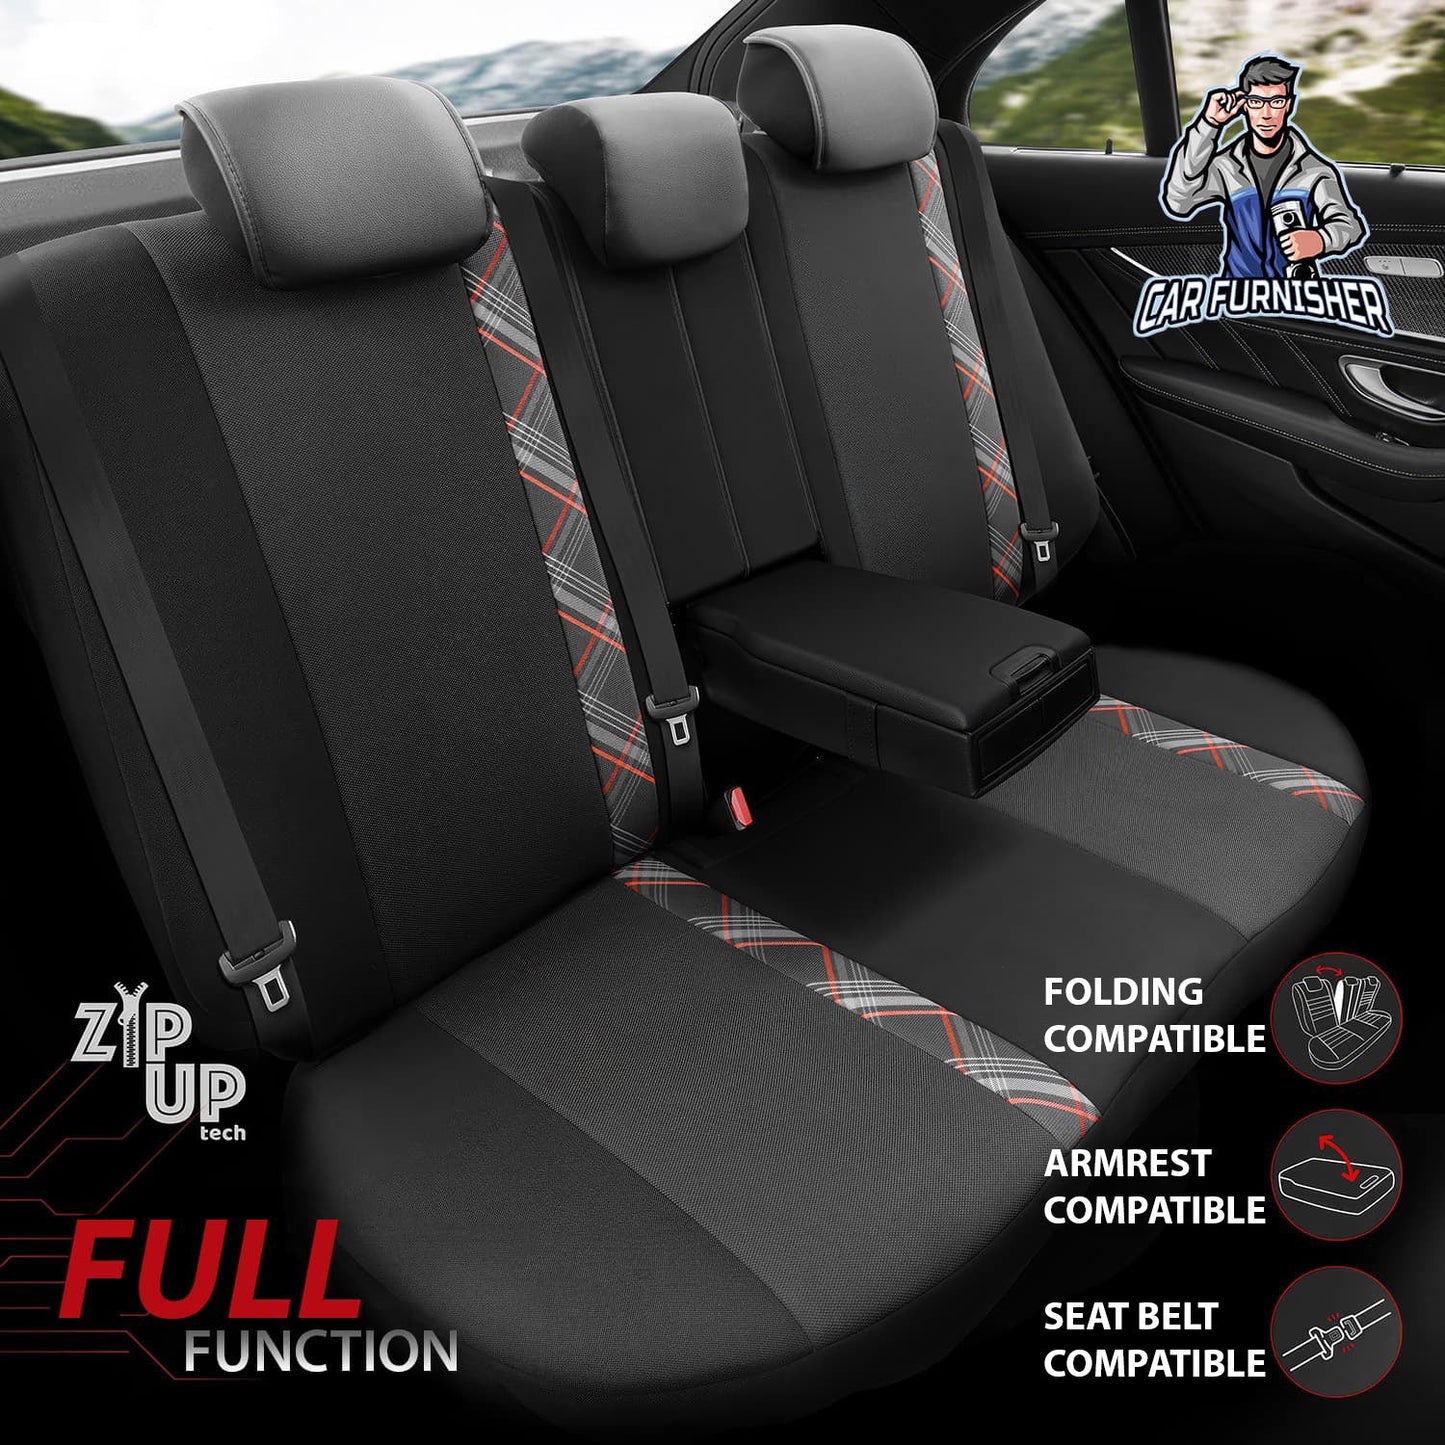 Mercedes 190 Seat Covers Horizon Design Red 5 Seats + Headrests (Full Set) Leather & Jacquard Fabric